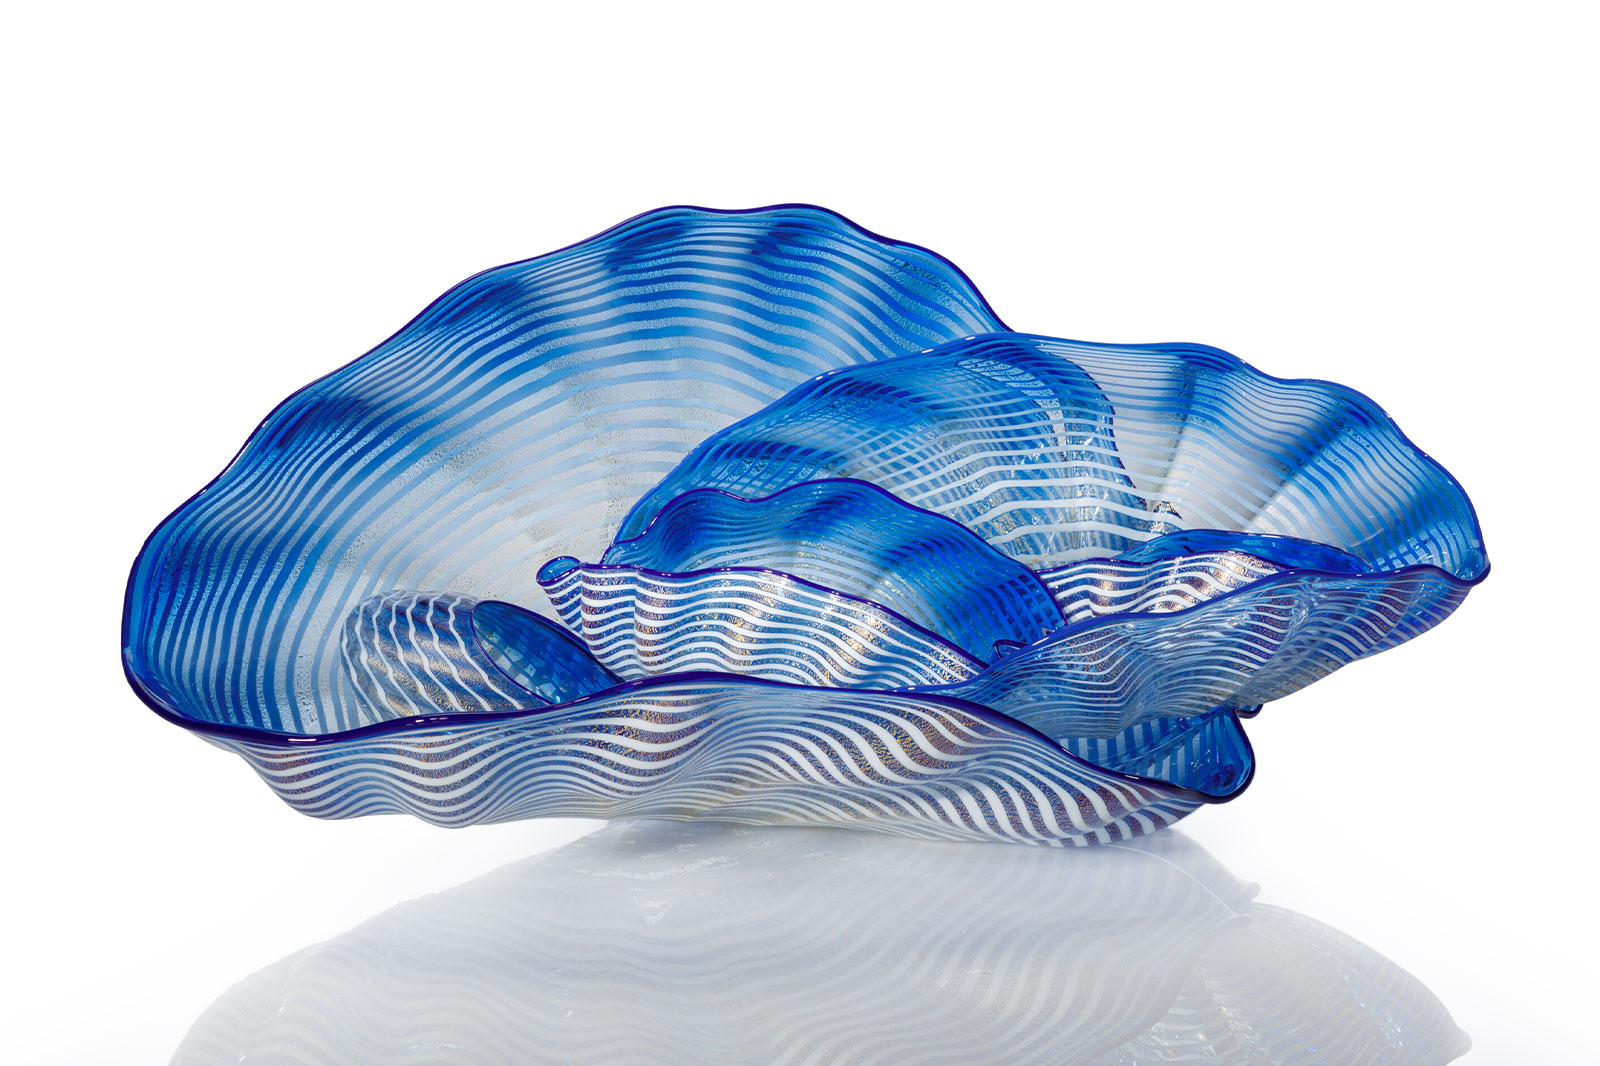 Indigo Gold Leaf Seaform Set with Midnight Lip Wraps, 2014, by Dale Chihuly